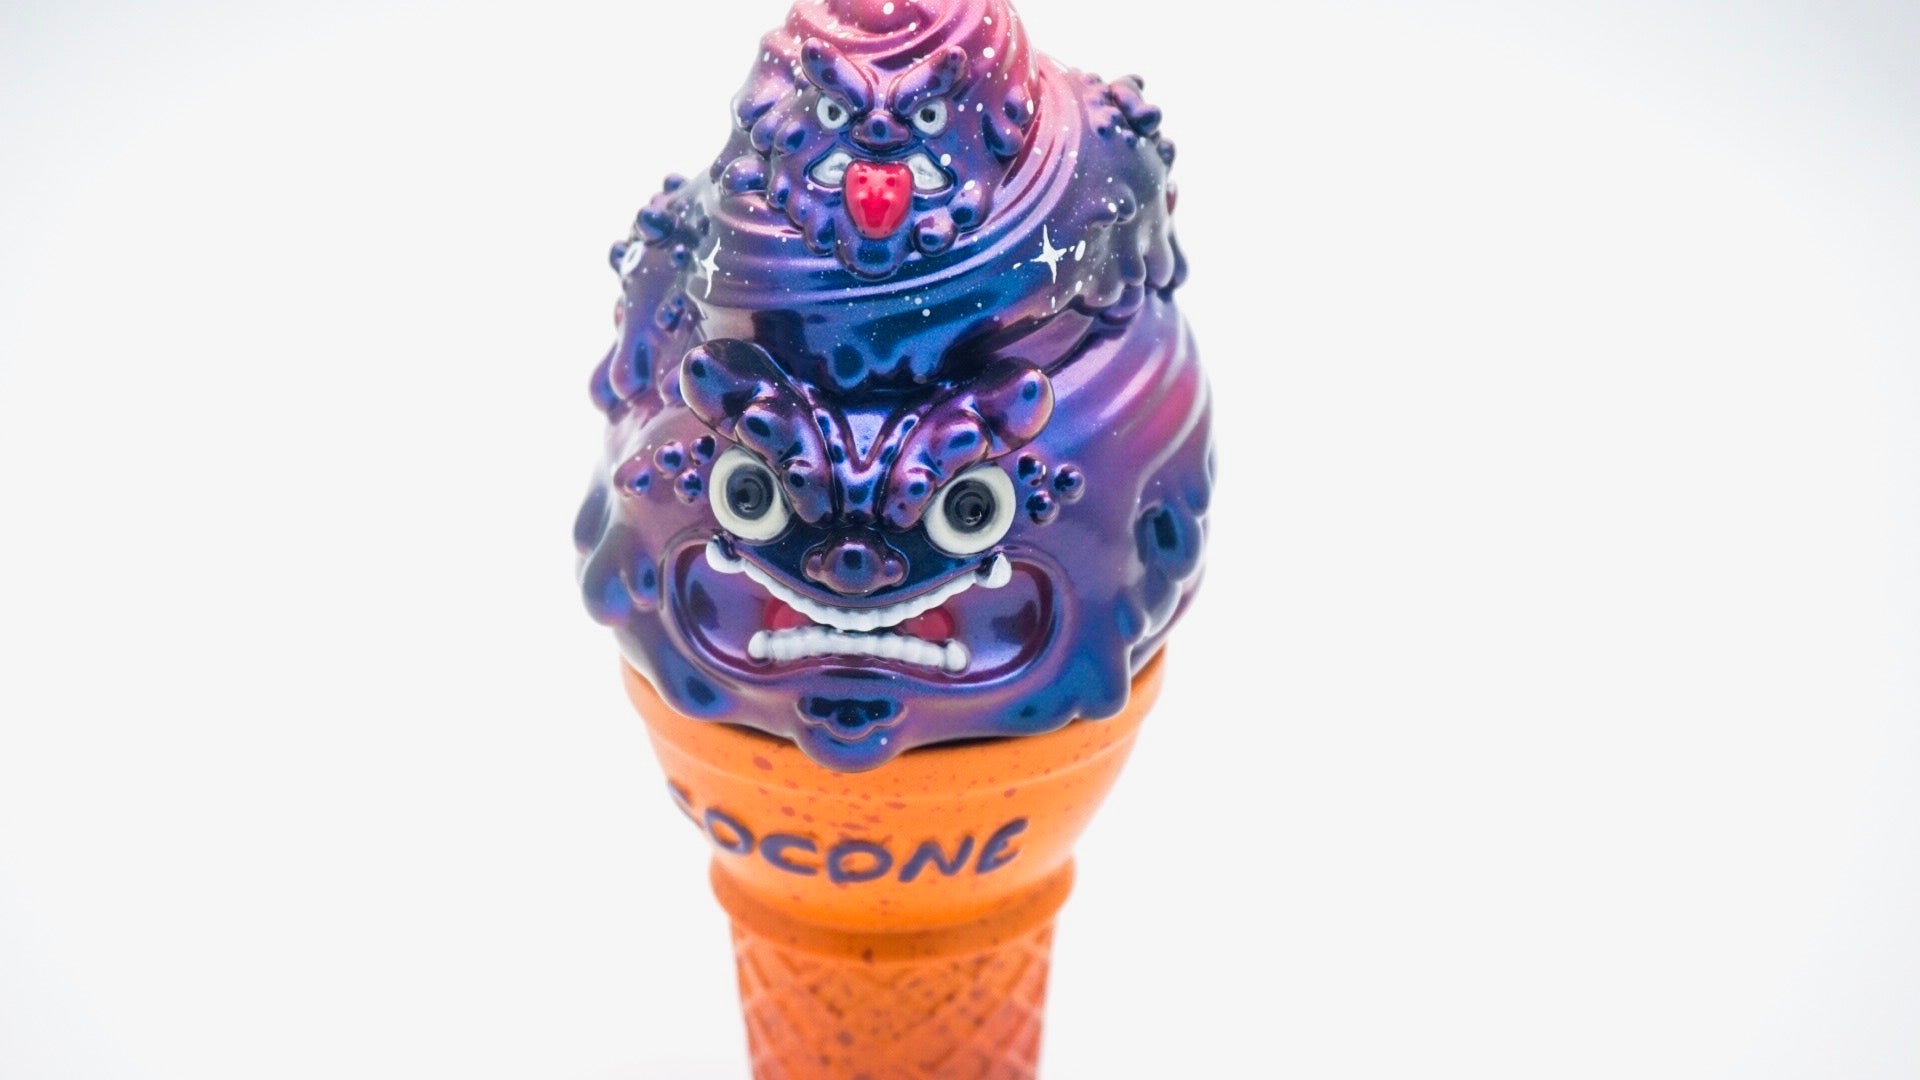 Cocone Galaxy version by Toon Pawit x Wee Toys